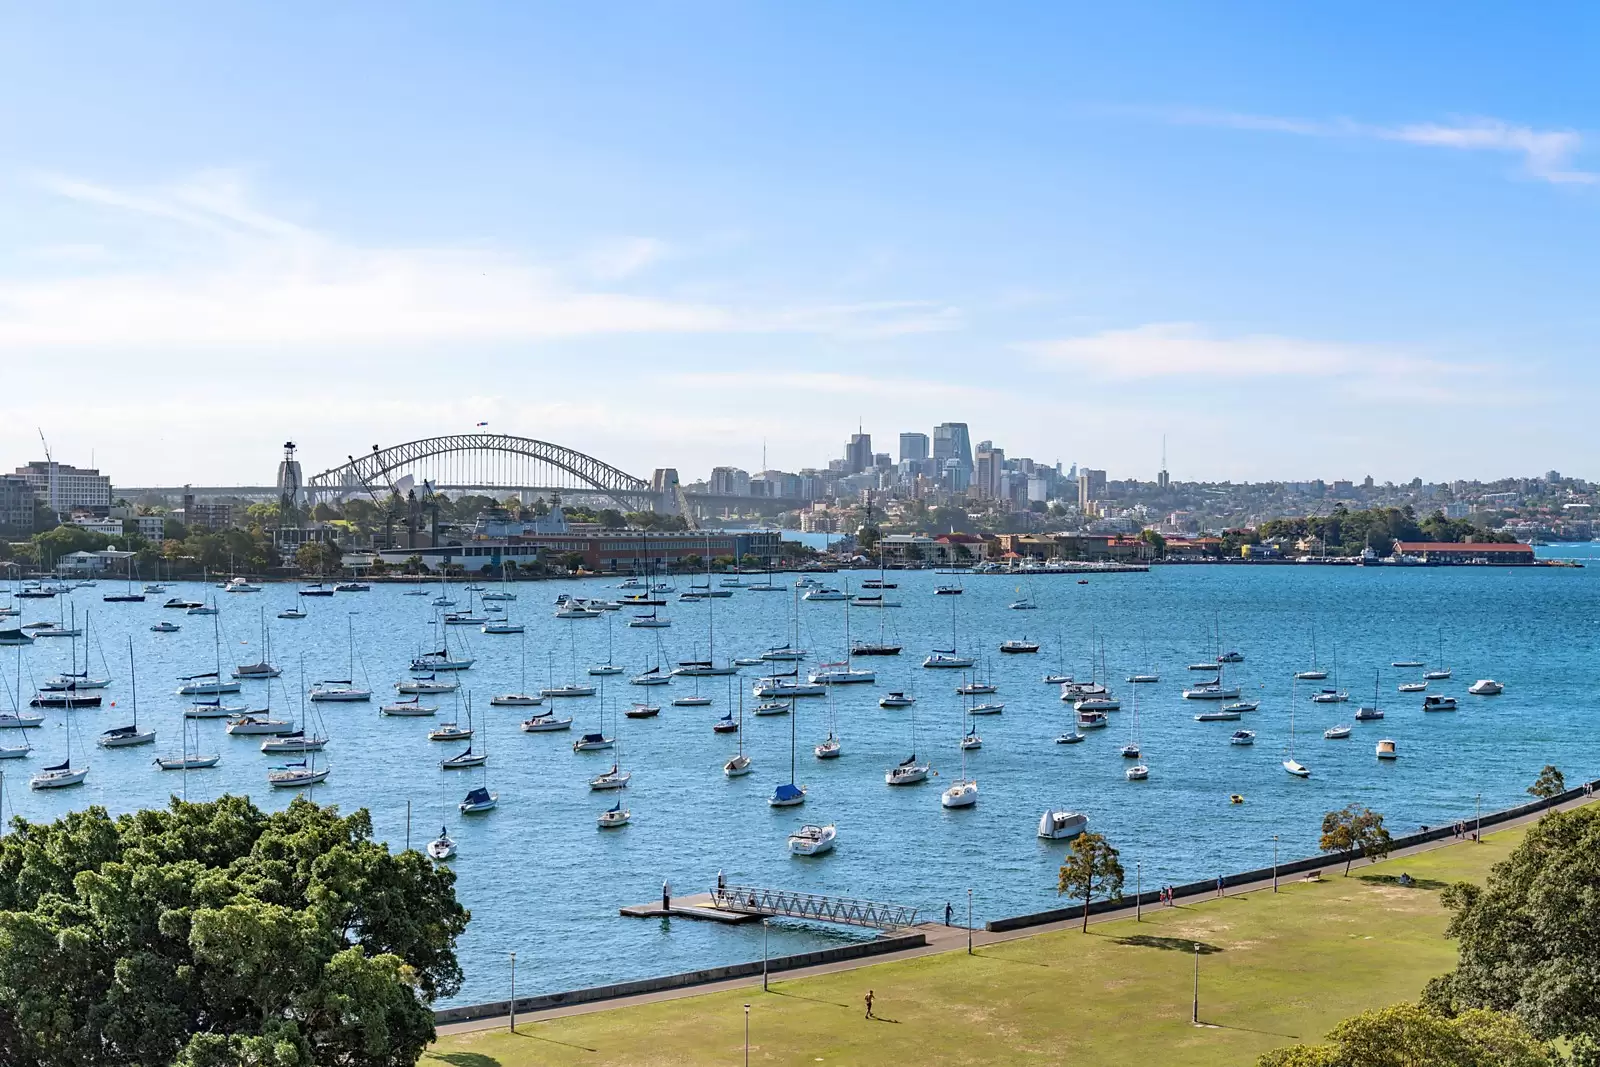 Photo #8: 50/11 Yarranabbe Road, Darling Point - Sold by Sydney Sotheby's International Realty